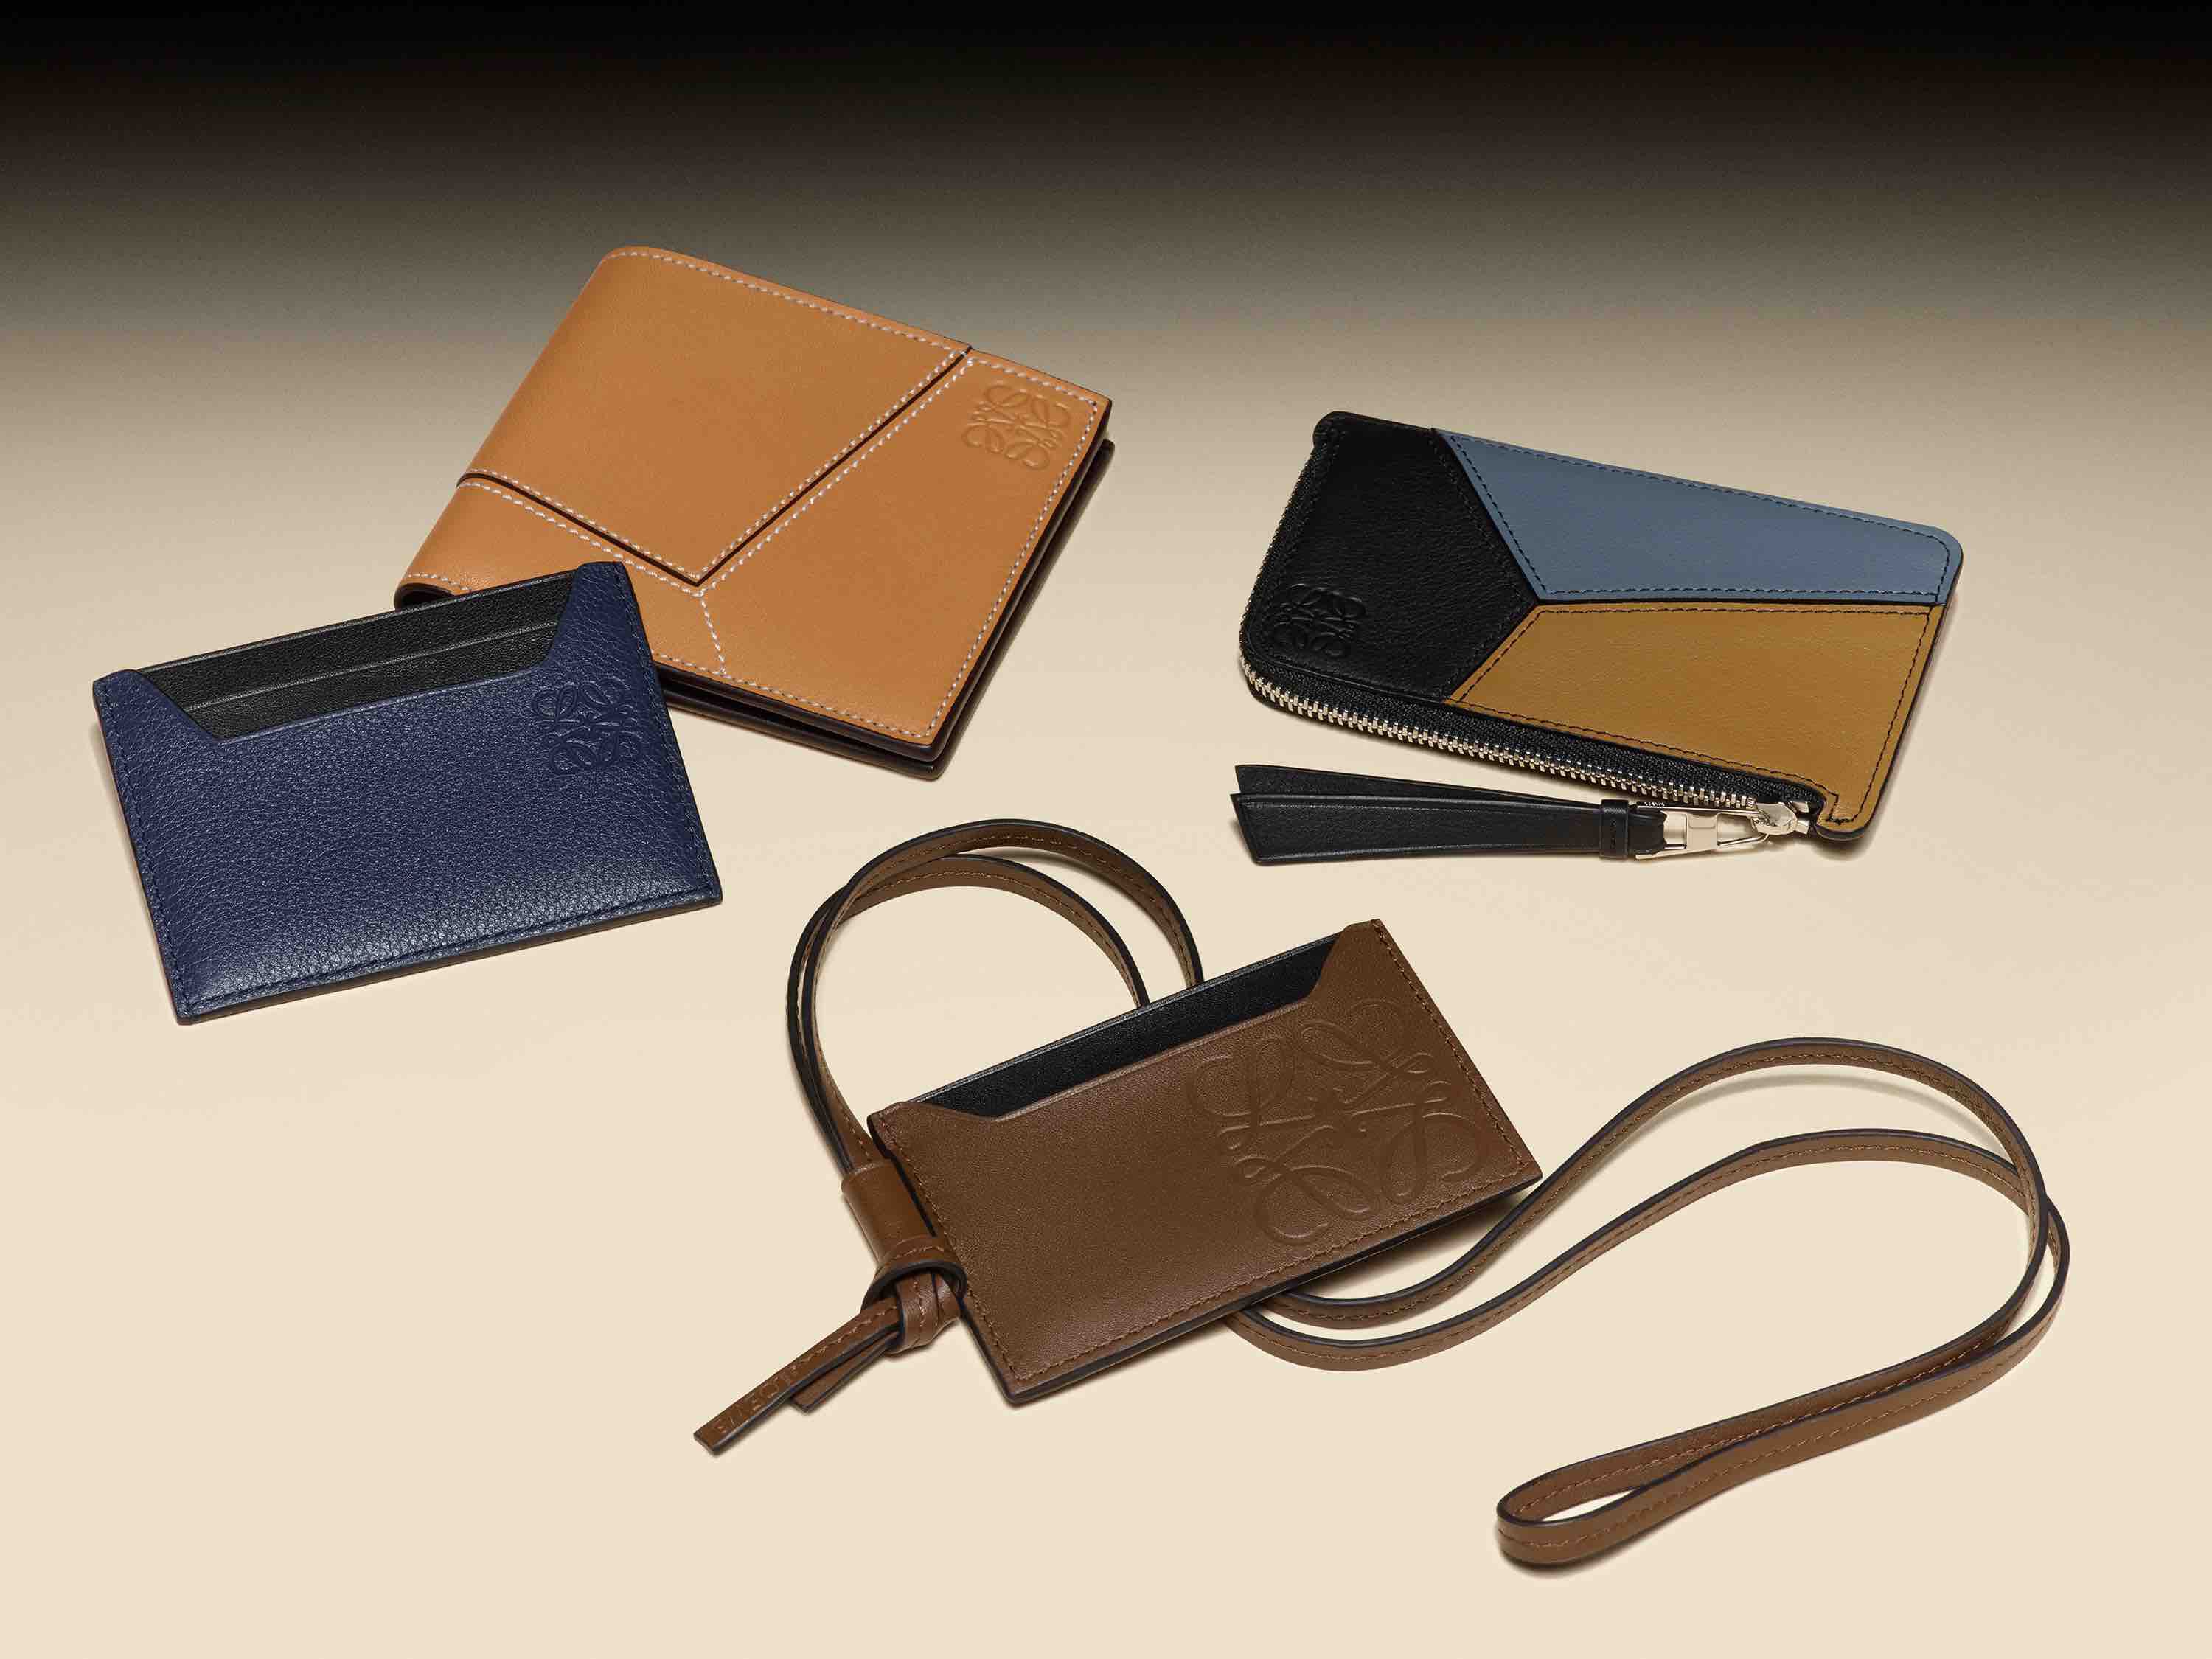 Luxury gifts for men - LOEWE Official Site